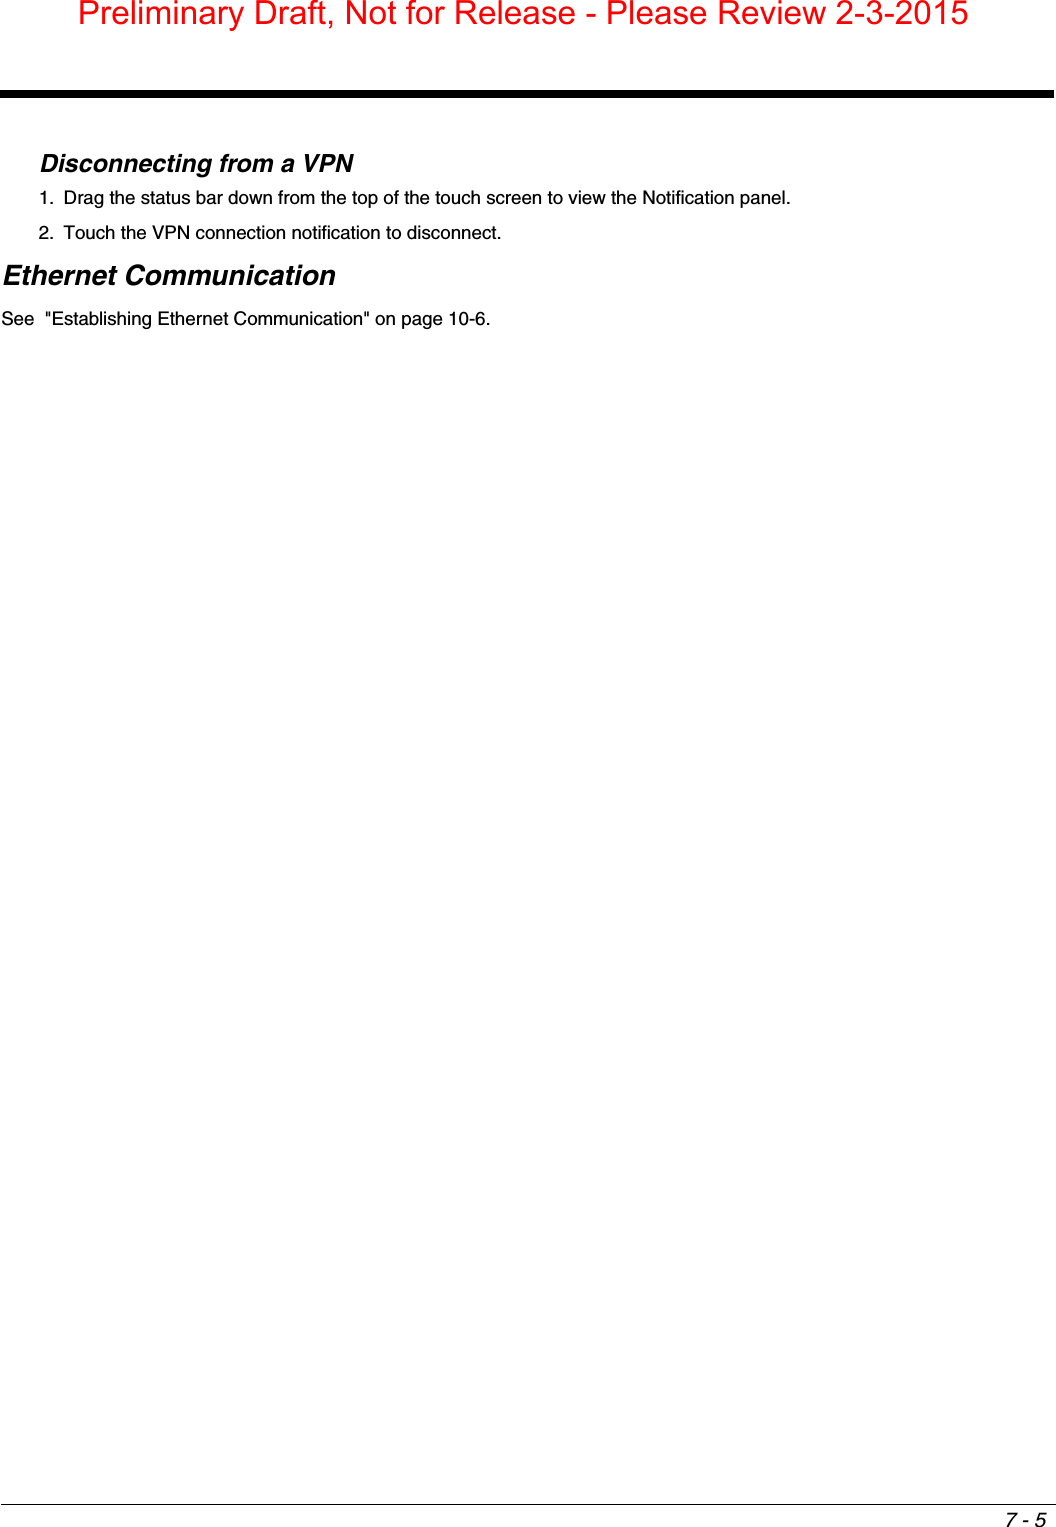 7 - 5Disconnecting from a VPN1. Drag the status bar down from the top of the touch screen to view the Notification panel.2. Touch the VPN connection notification to disconnect.Ethernet CommunicationSee  &quot;Establishing Ethernet Communication&quot; on page 10-6. Preliminary Draft, Not for Release - Please Review 2-3-2015